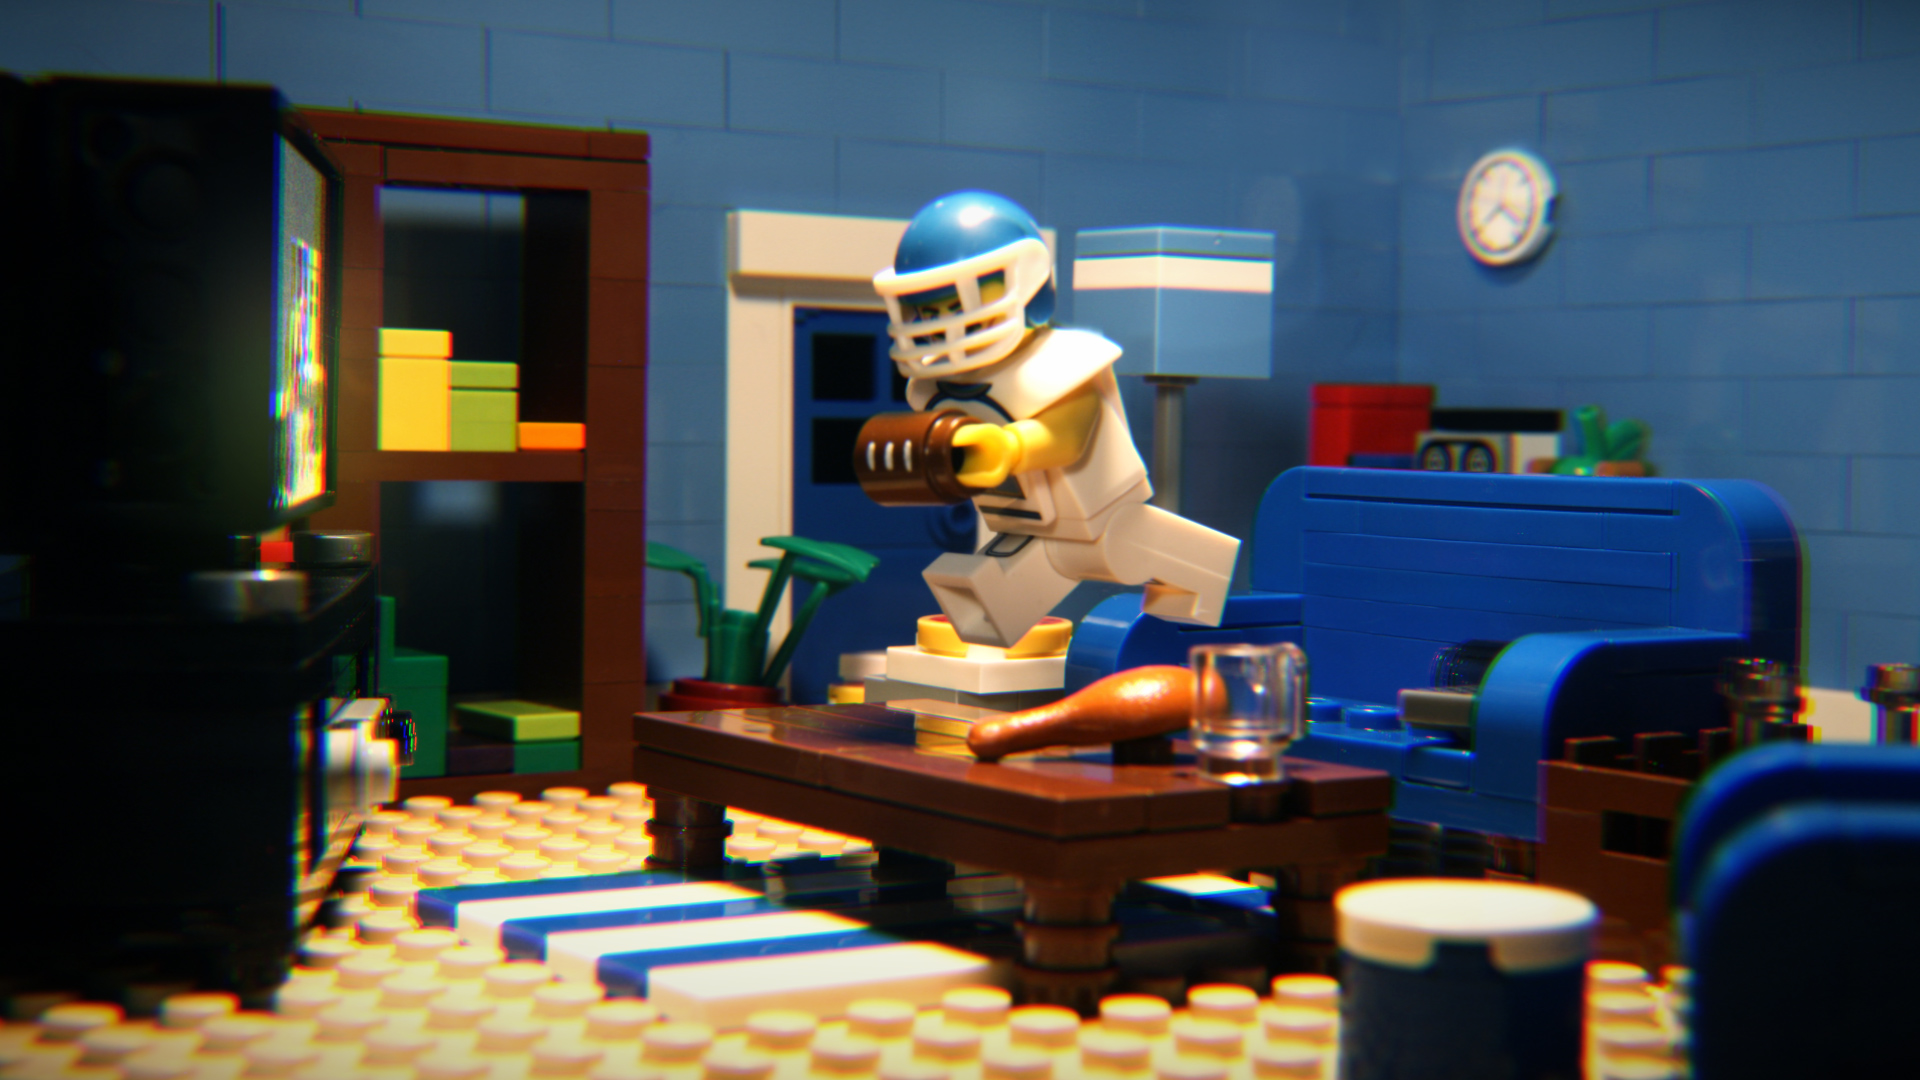 How A+C Studios Recreated the Super Bowl Ads Brick by Brick